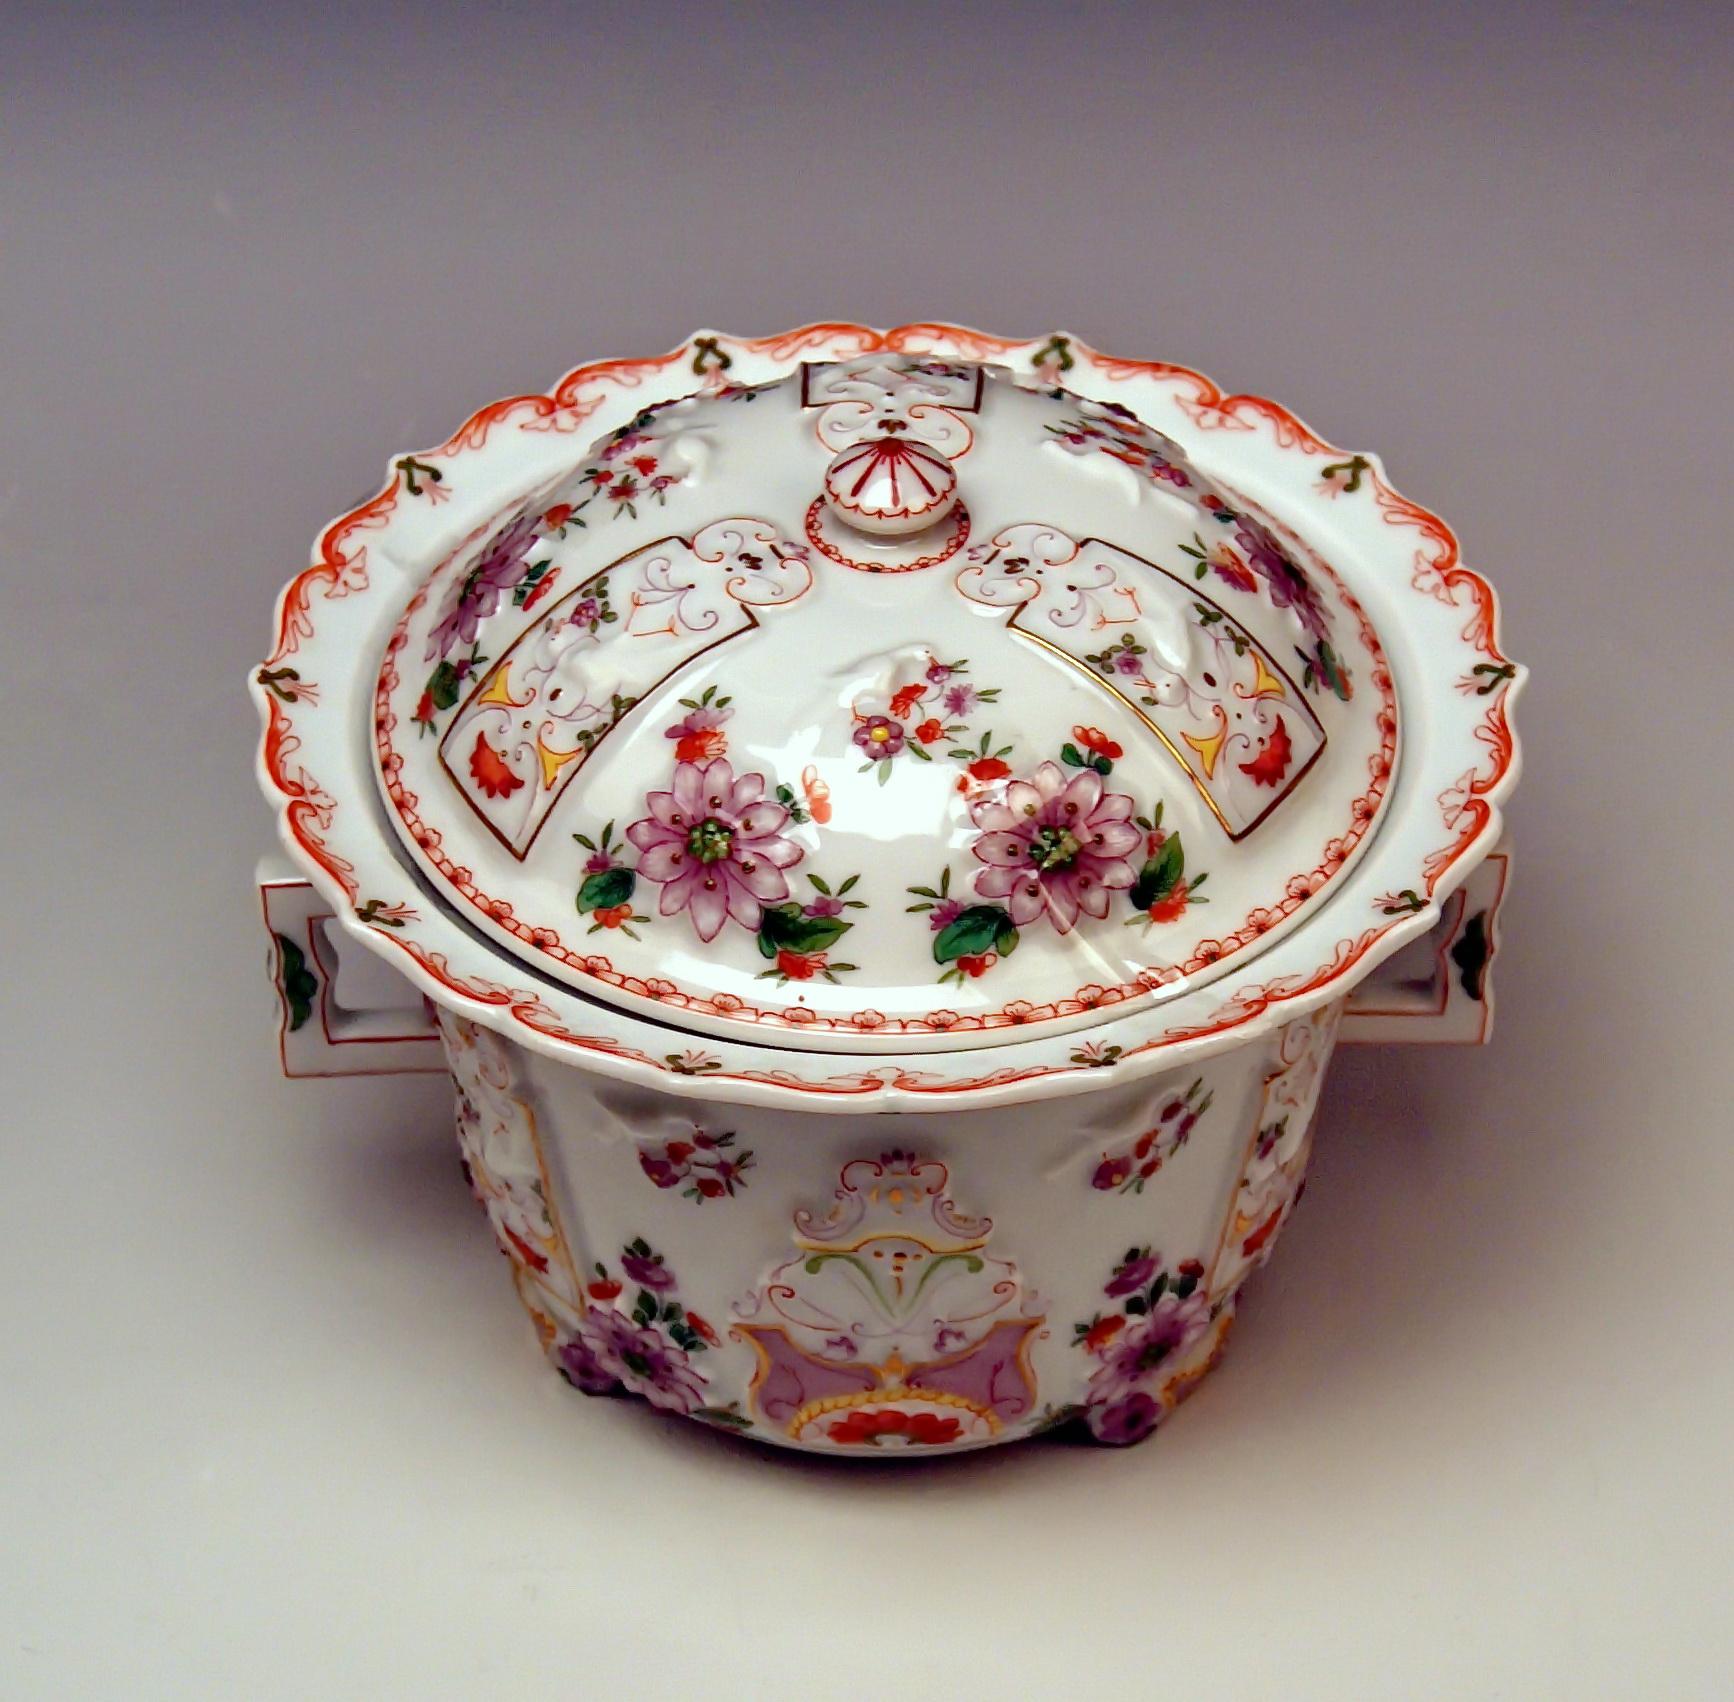 We invite you here to look at a splendid as well as rarest Augarten Vienna Porcelain item.
It is a two-handled as well as lidded oil pot or candy box, made in Baroque style, strongly influenced by Asian (Chinese) art. Its wall made of white